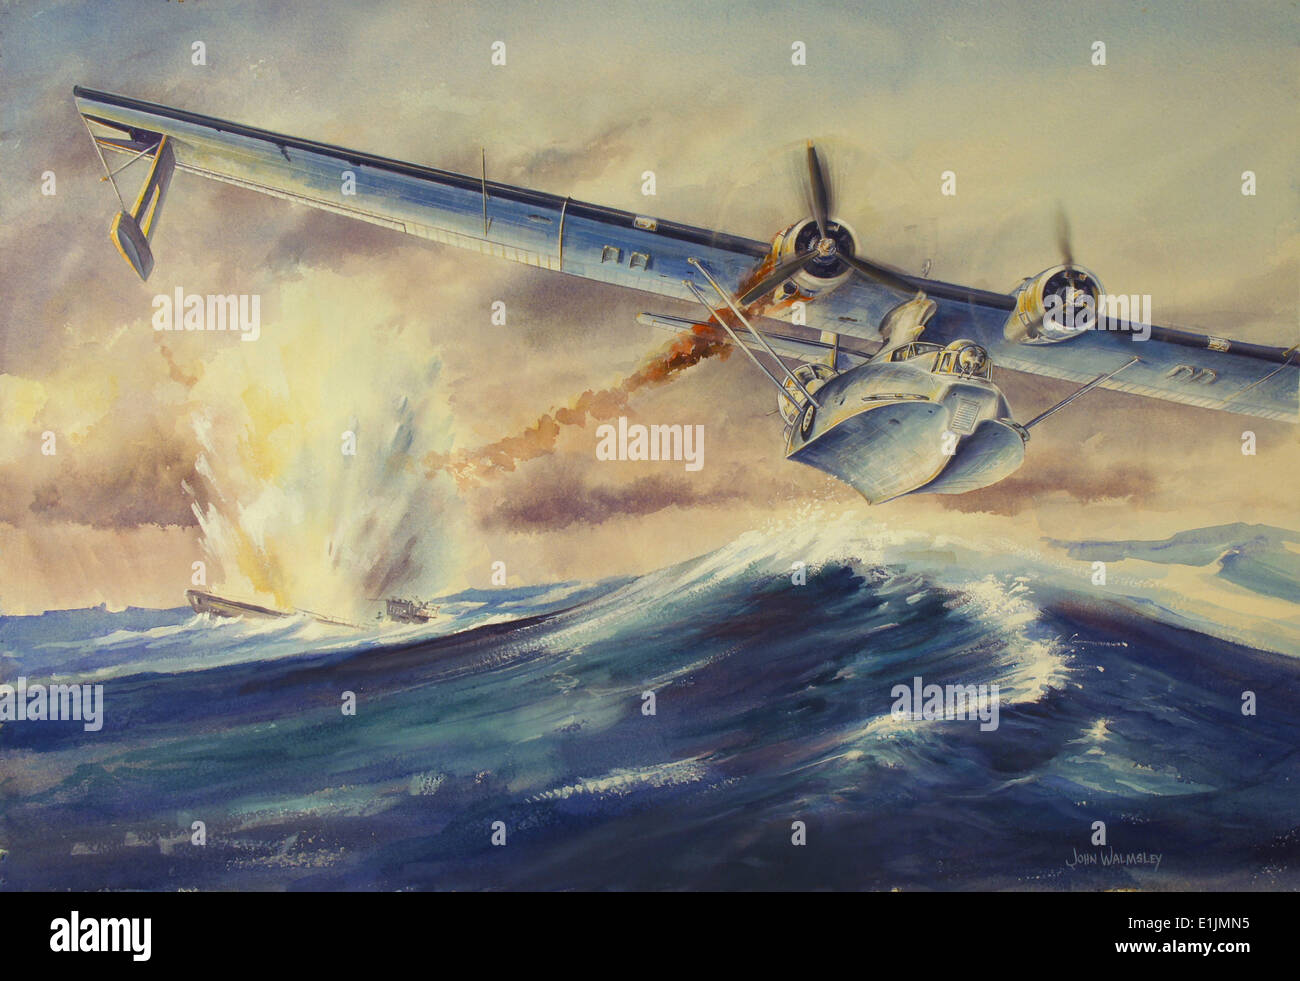 A damaged PBY Catalina aircraft after the attack and sinking of a German U-boat. Stock Photo